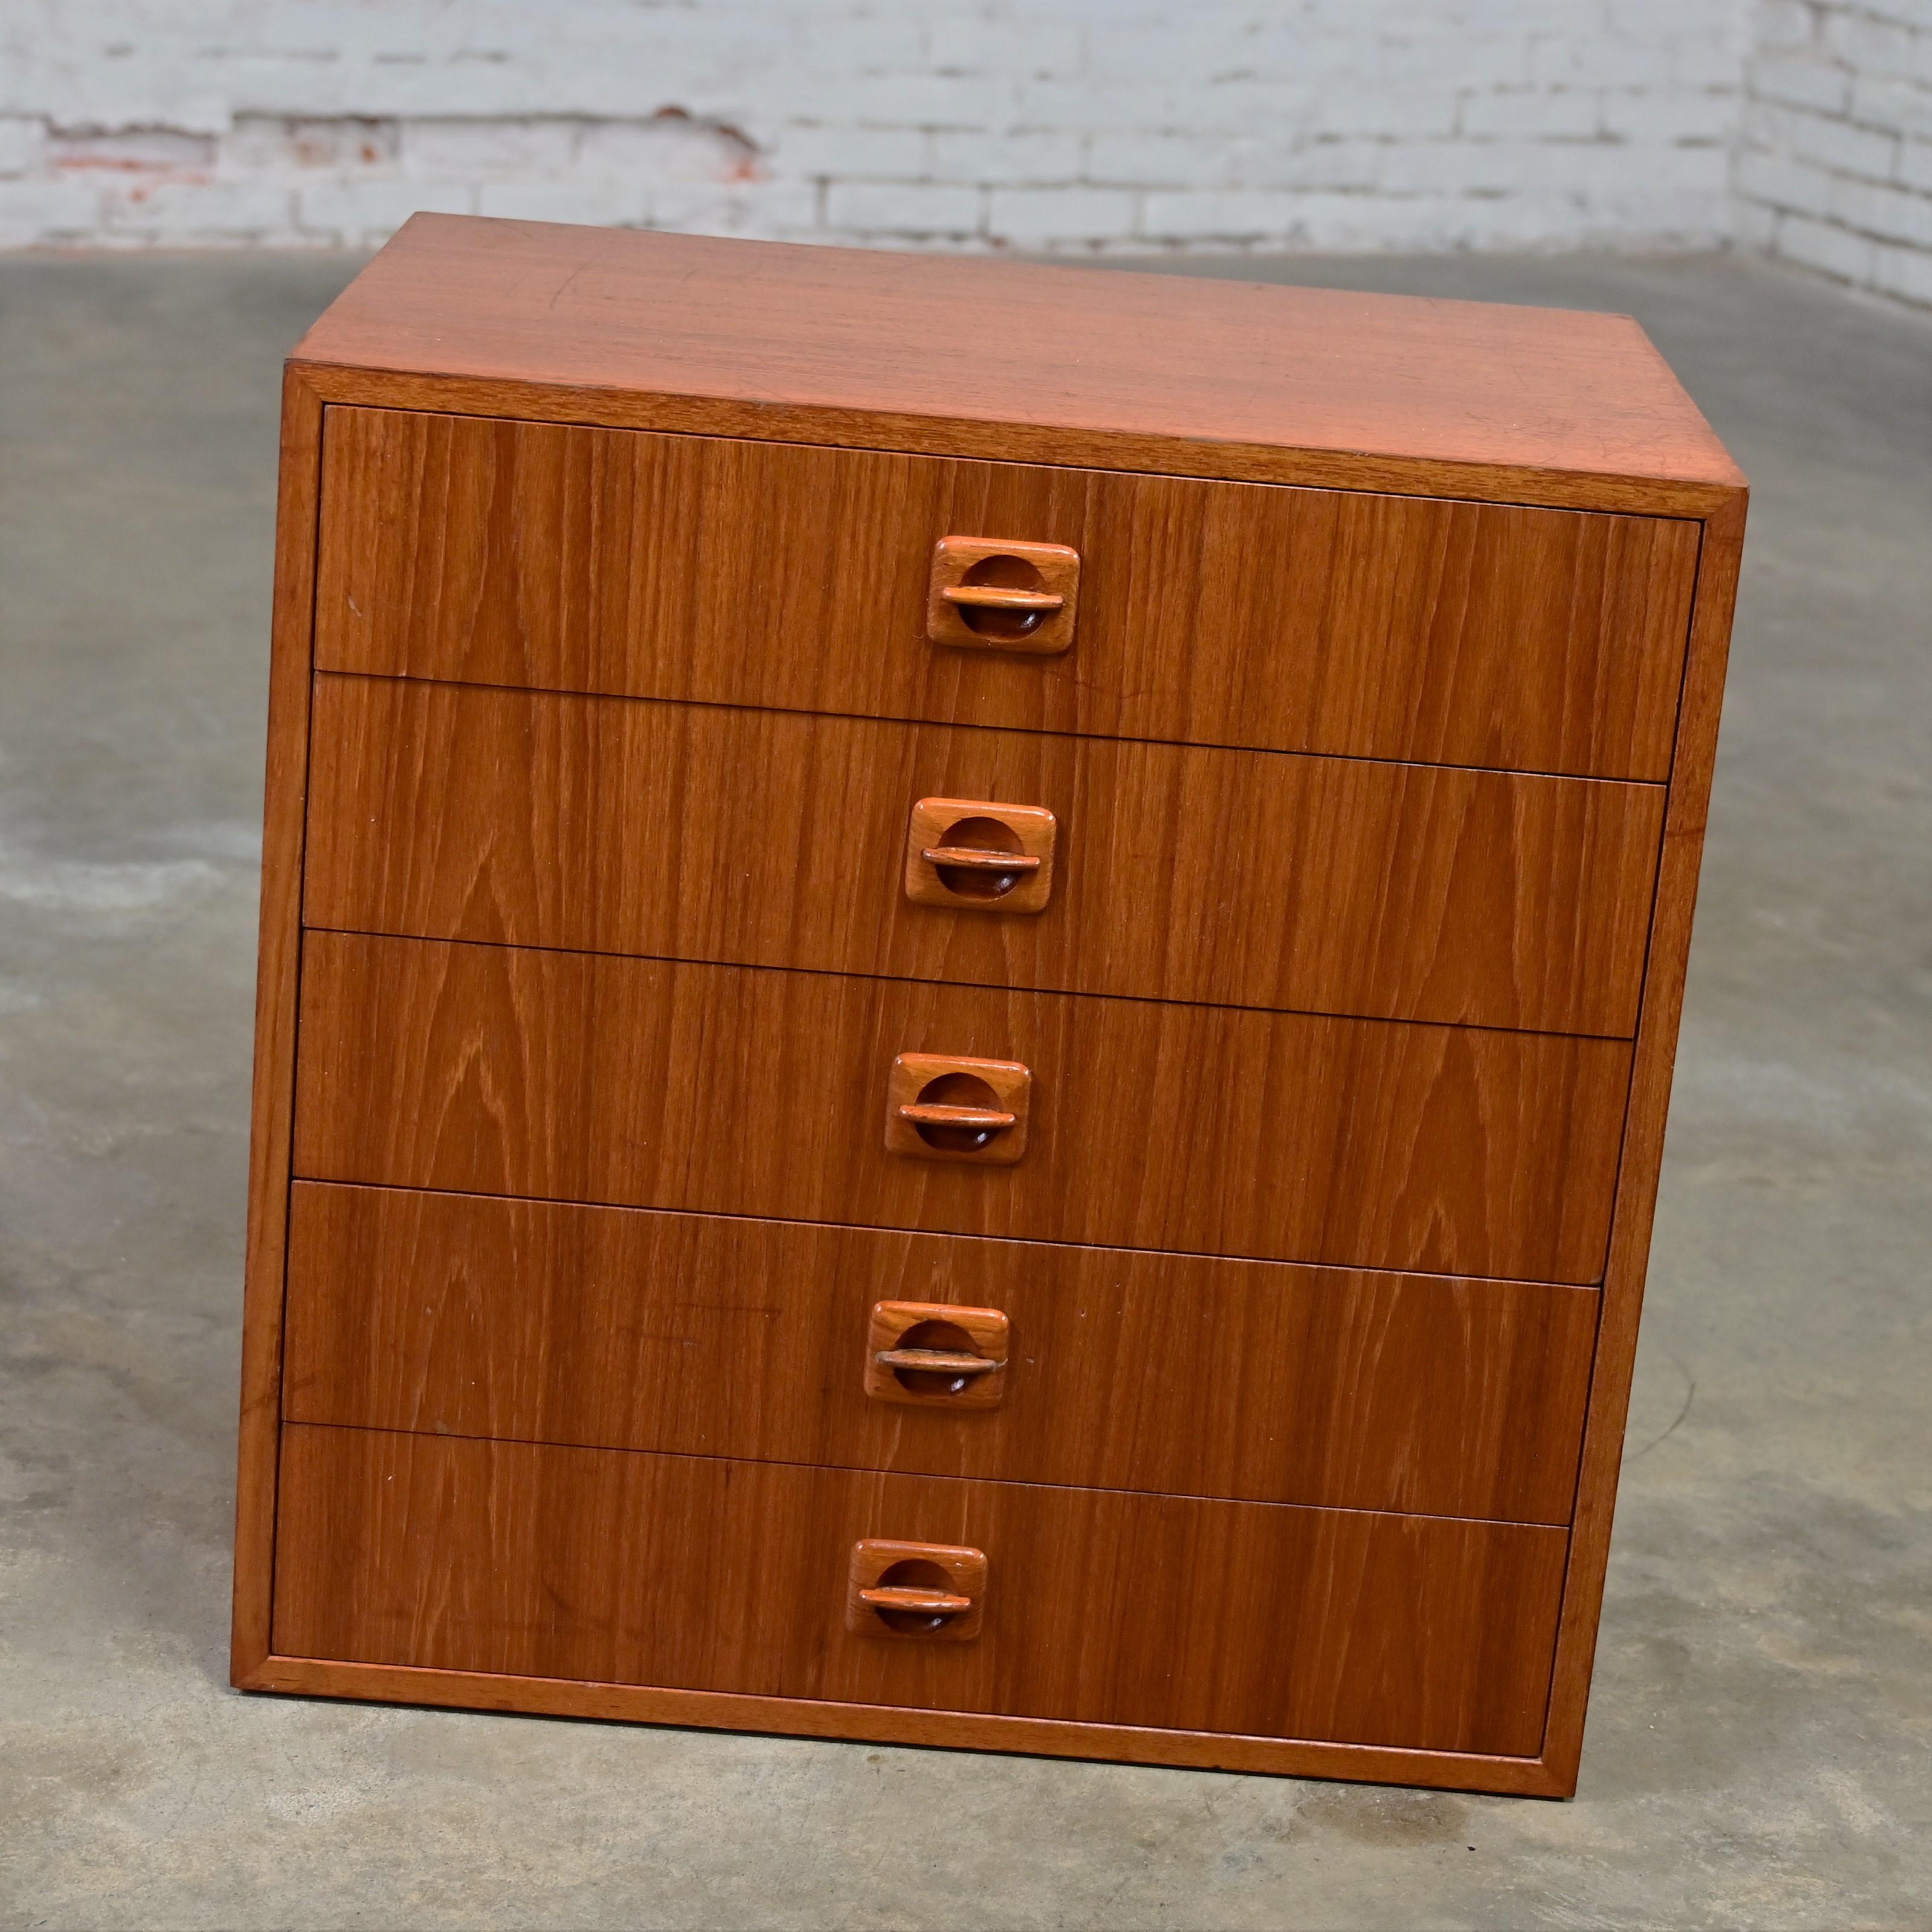 Mid to Late 20th Century Scandinavian Modern Small Teak Cabinet 5 Drawers  For Sale 8